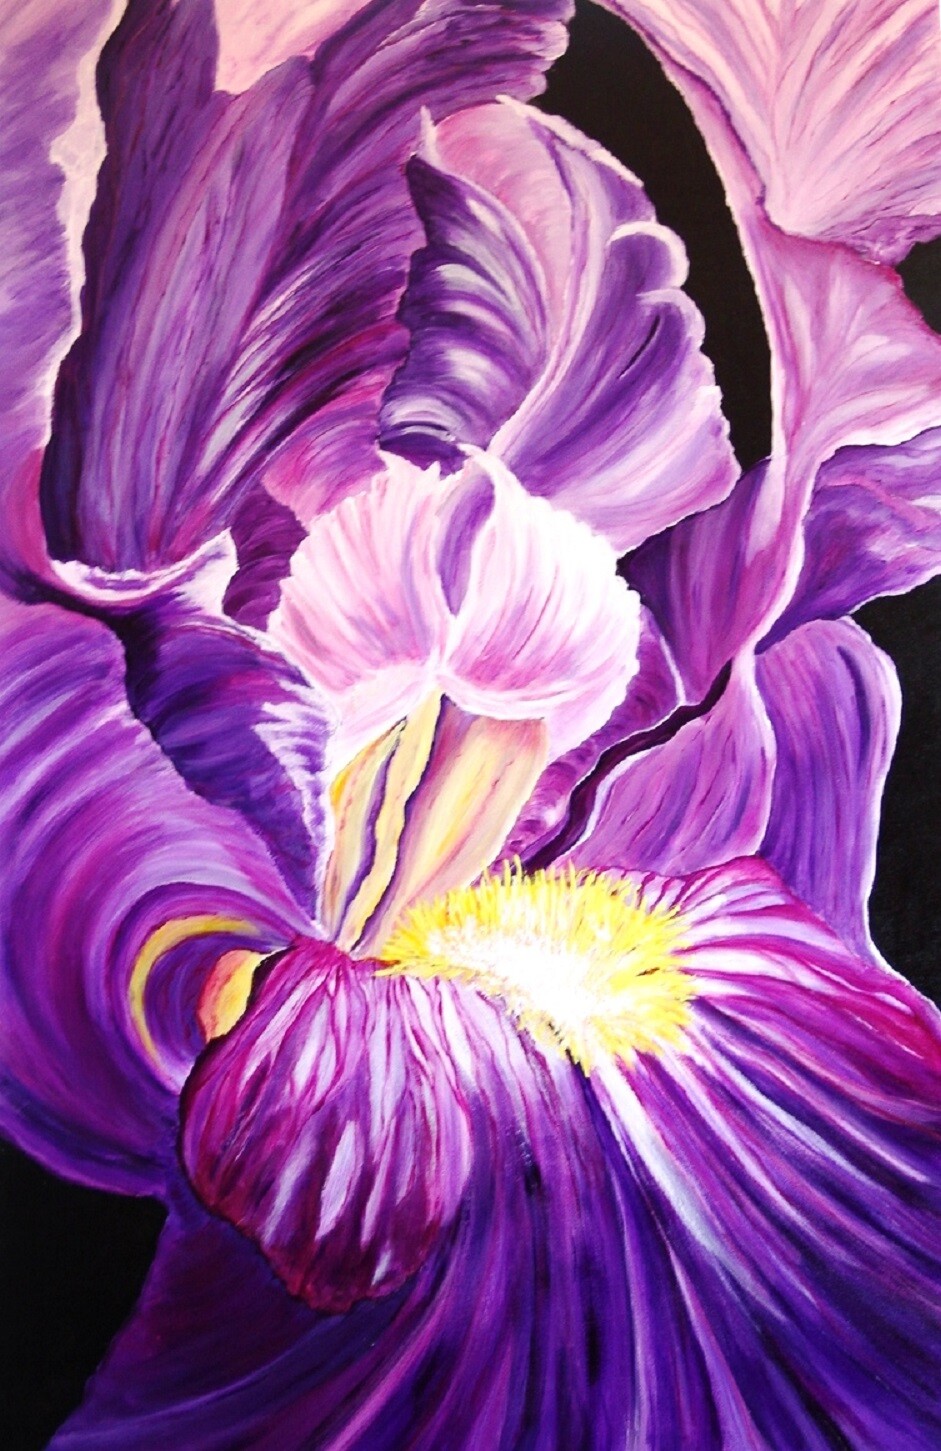 Bearded Iris, Painting by Ans Duin | Artmajeur